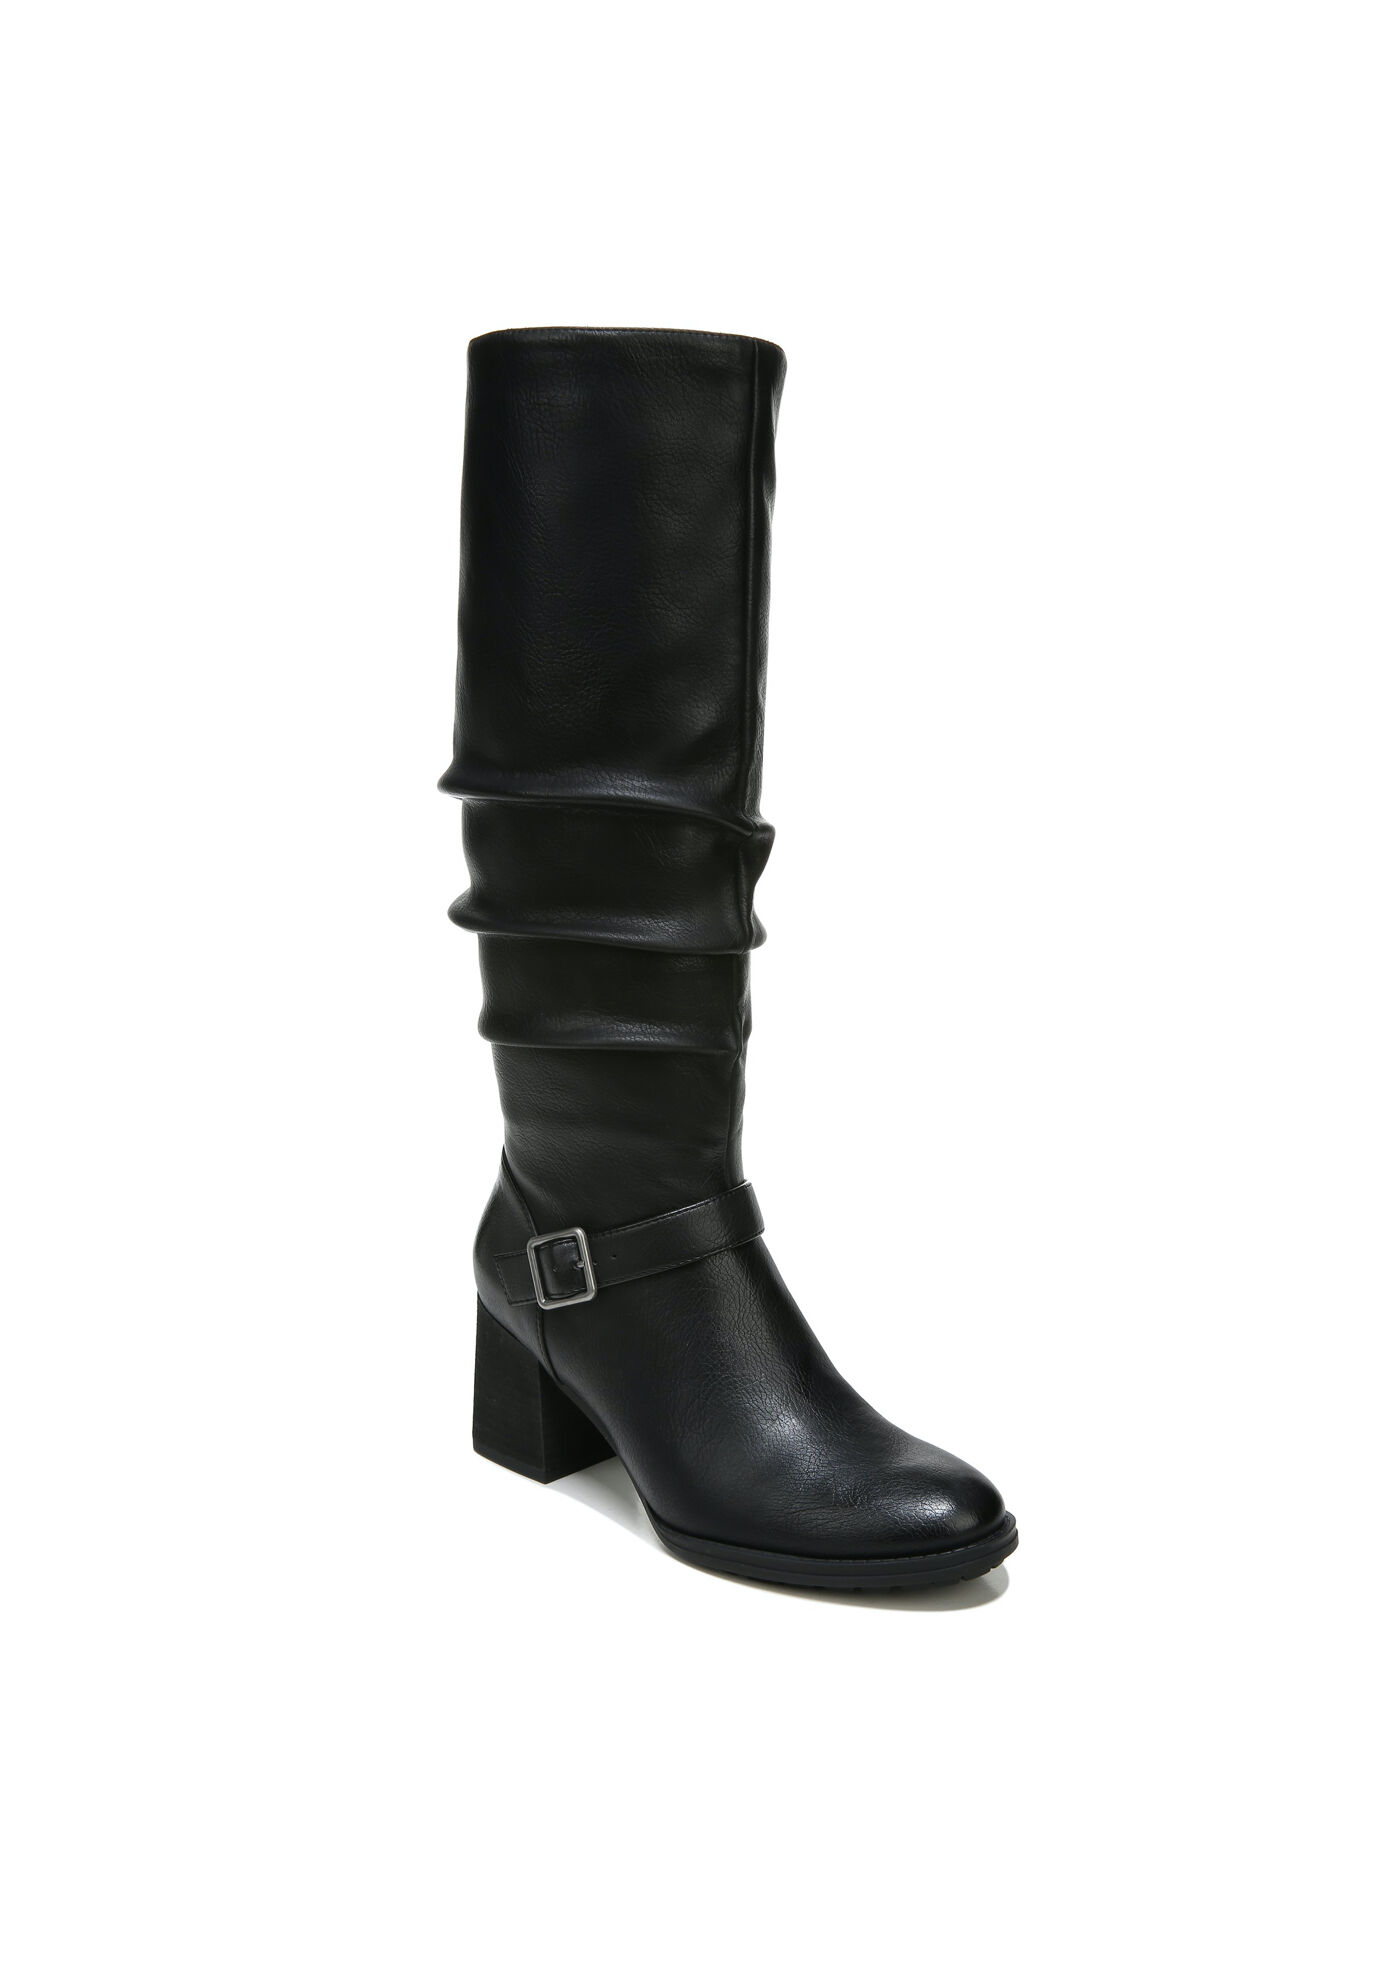 Women's Frost Knee High Boot by Roamans in Black Wide Calf (Size 7 1/2 M)